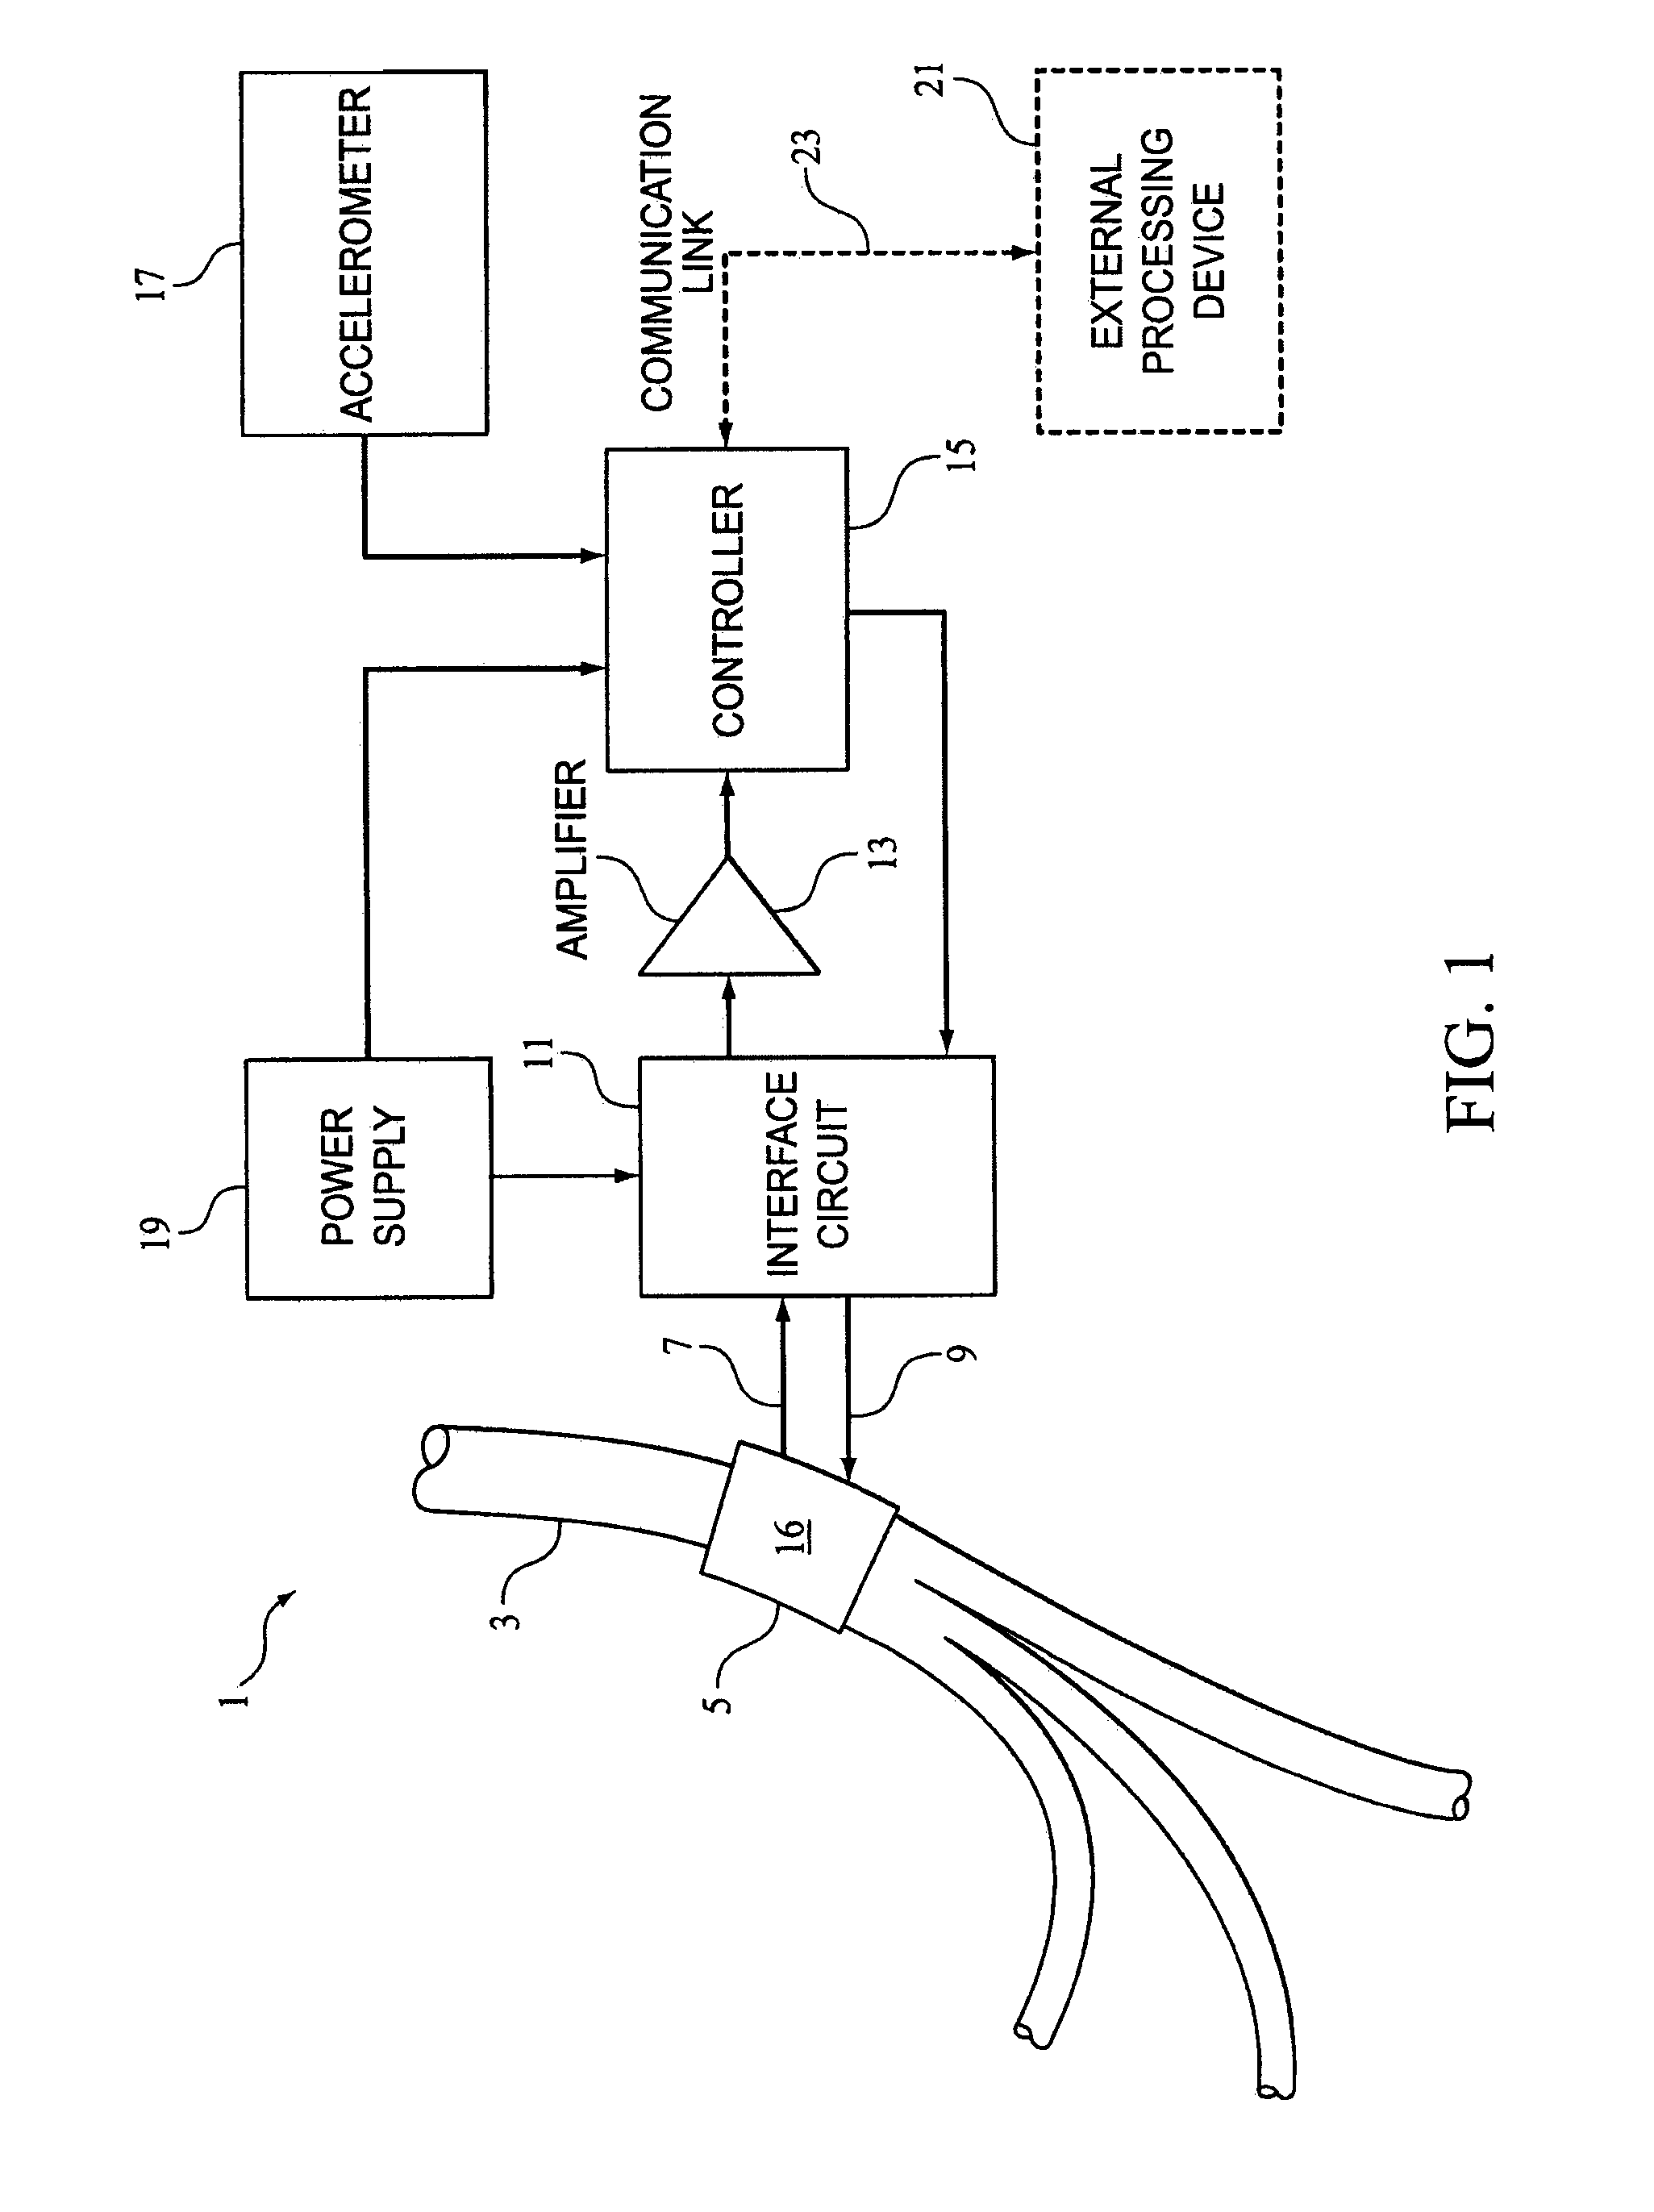 Method and apparatus for hypoglossal nerve stimulation